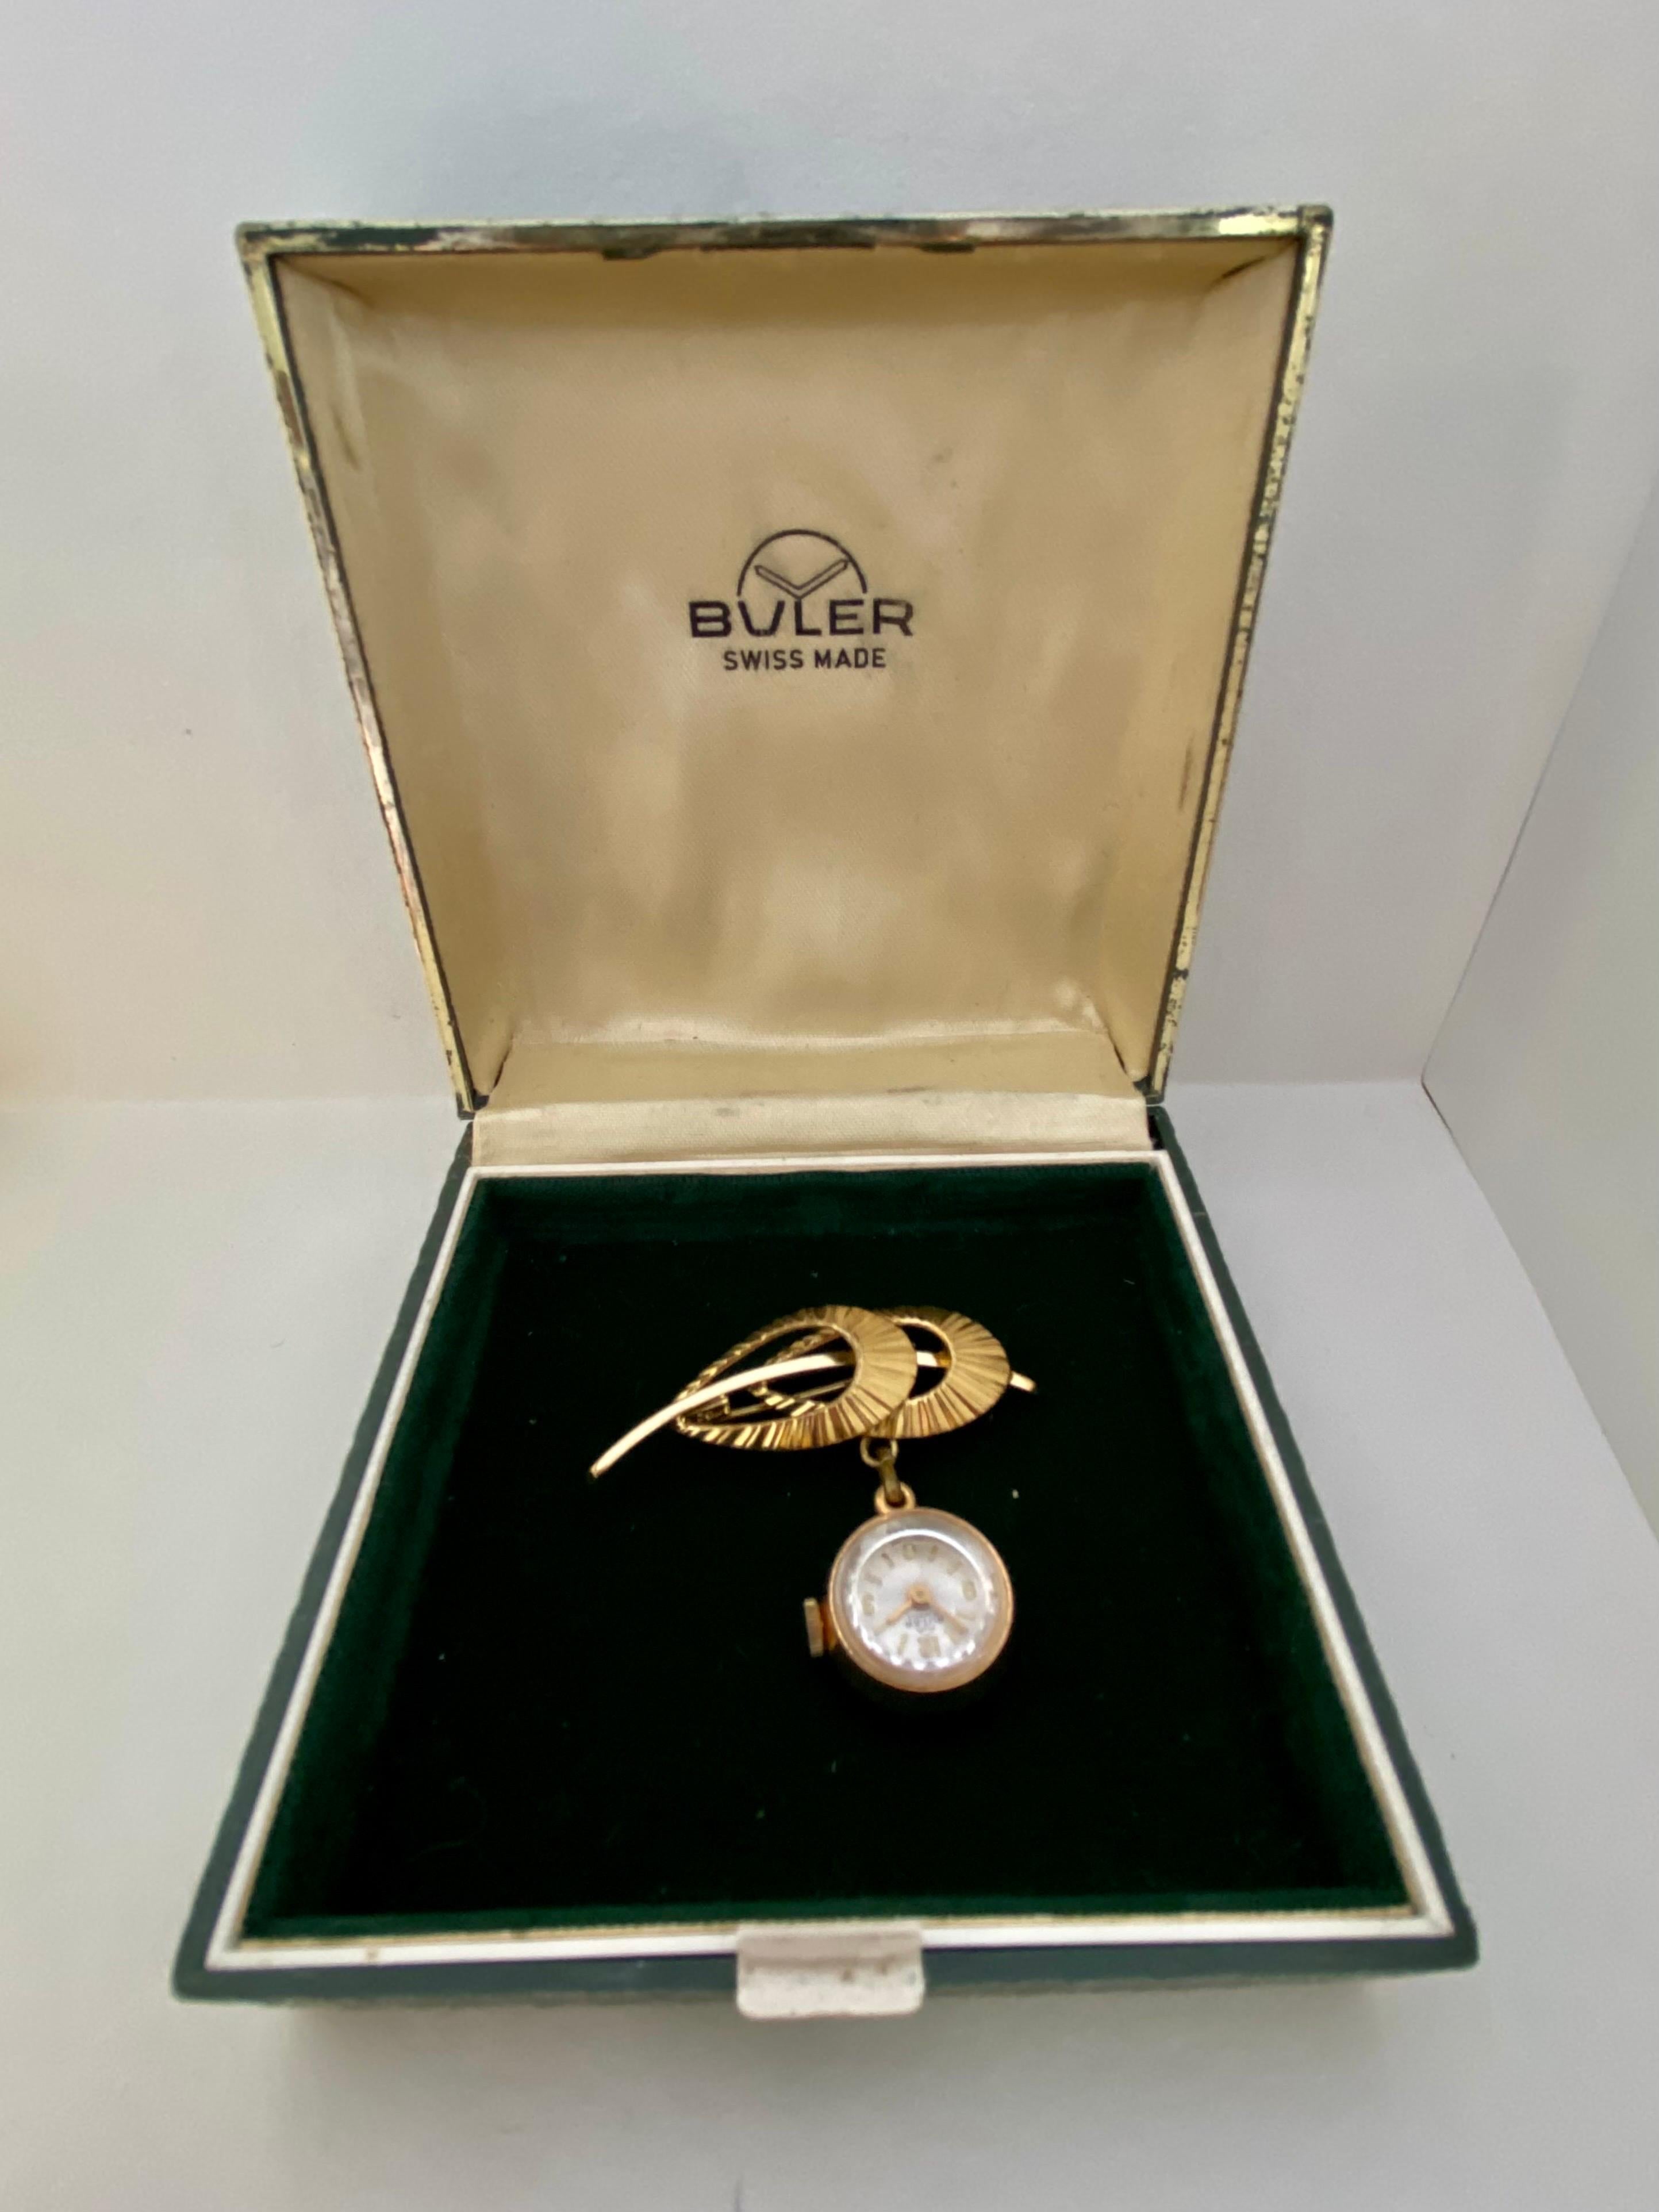 This beautiful mechanical brooch watch is in good working condition and it is running well. Visible signs of ageing and wear tiny surface marks on the watch case. It comes with a presentation box. Please study the images carefully as part of the